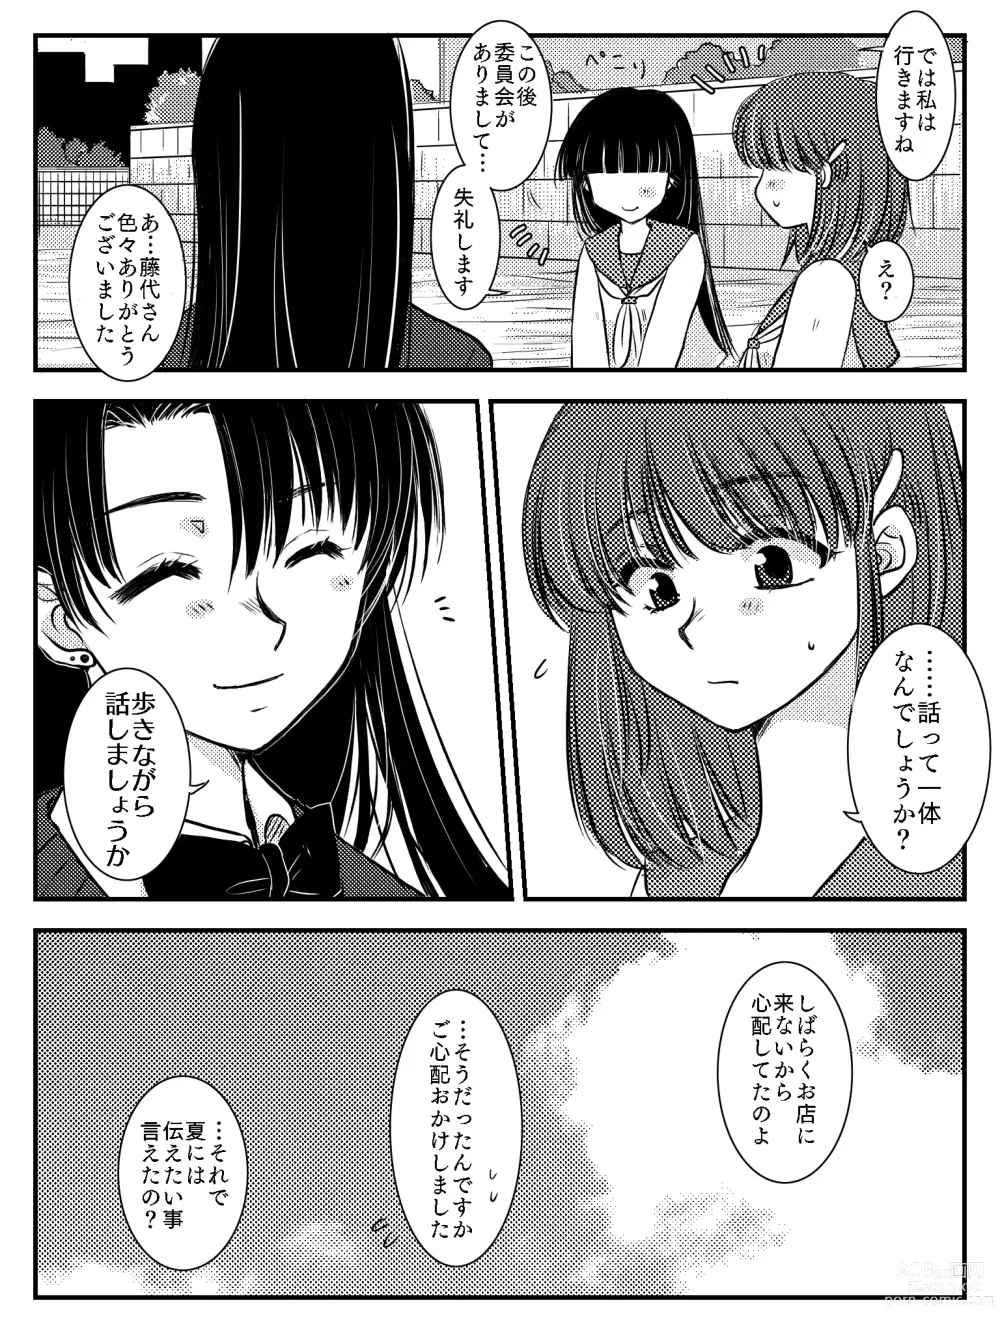 Page 13 of doujinshi LADIES NAVIGATION Episode 7 BE THE ONE